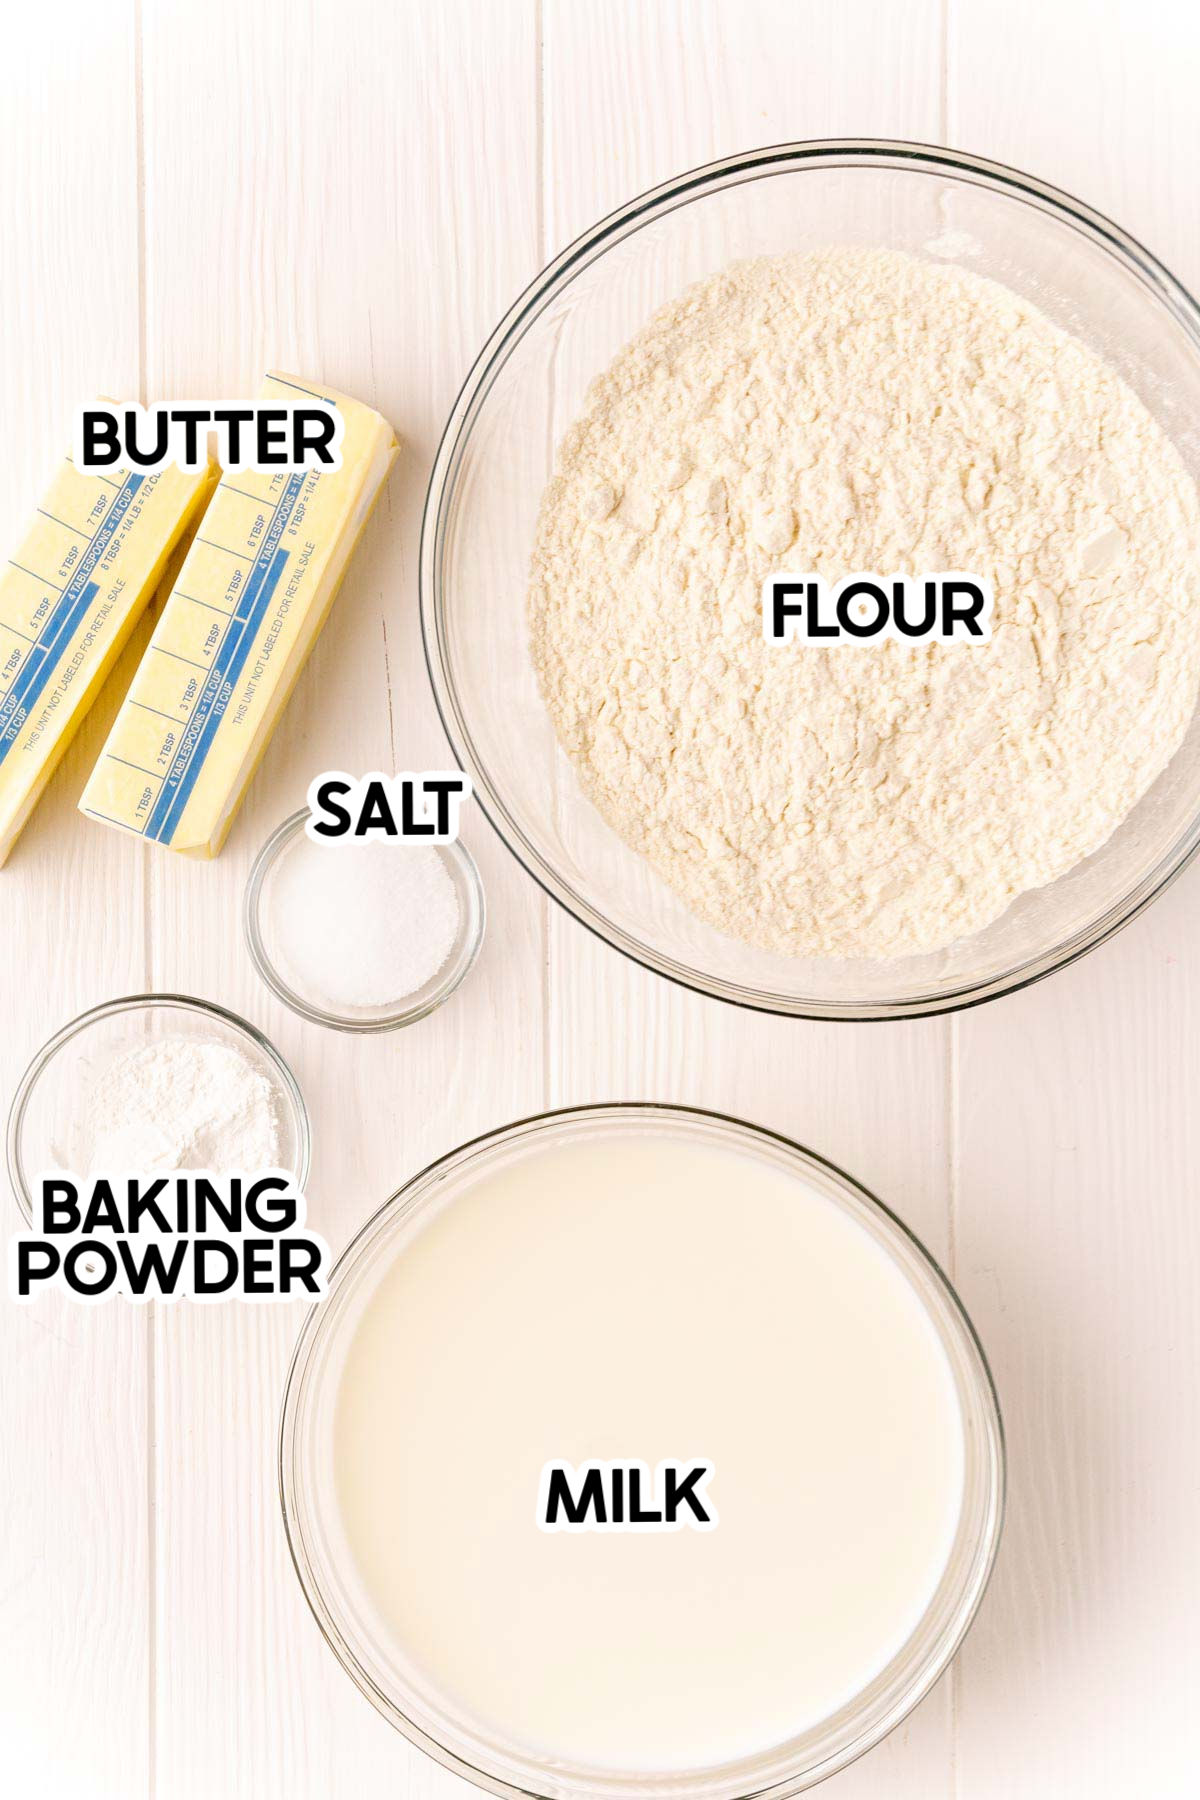 ingredients for easy drop biscuits with labels